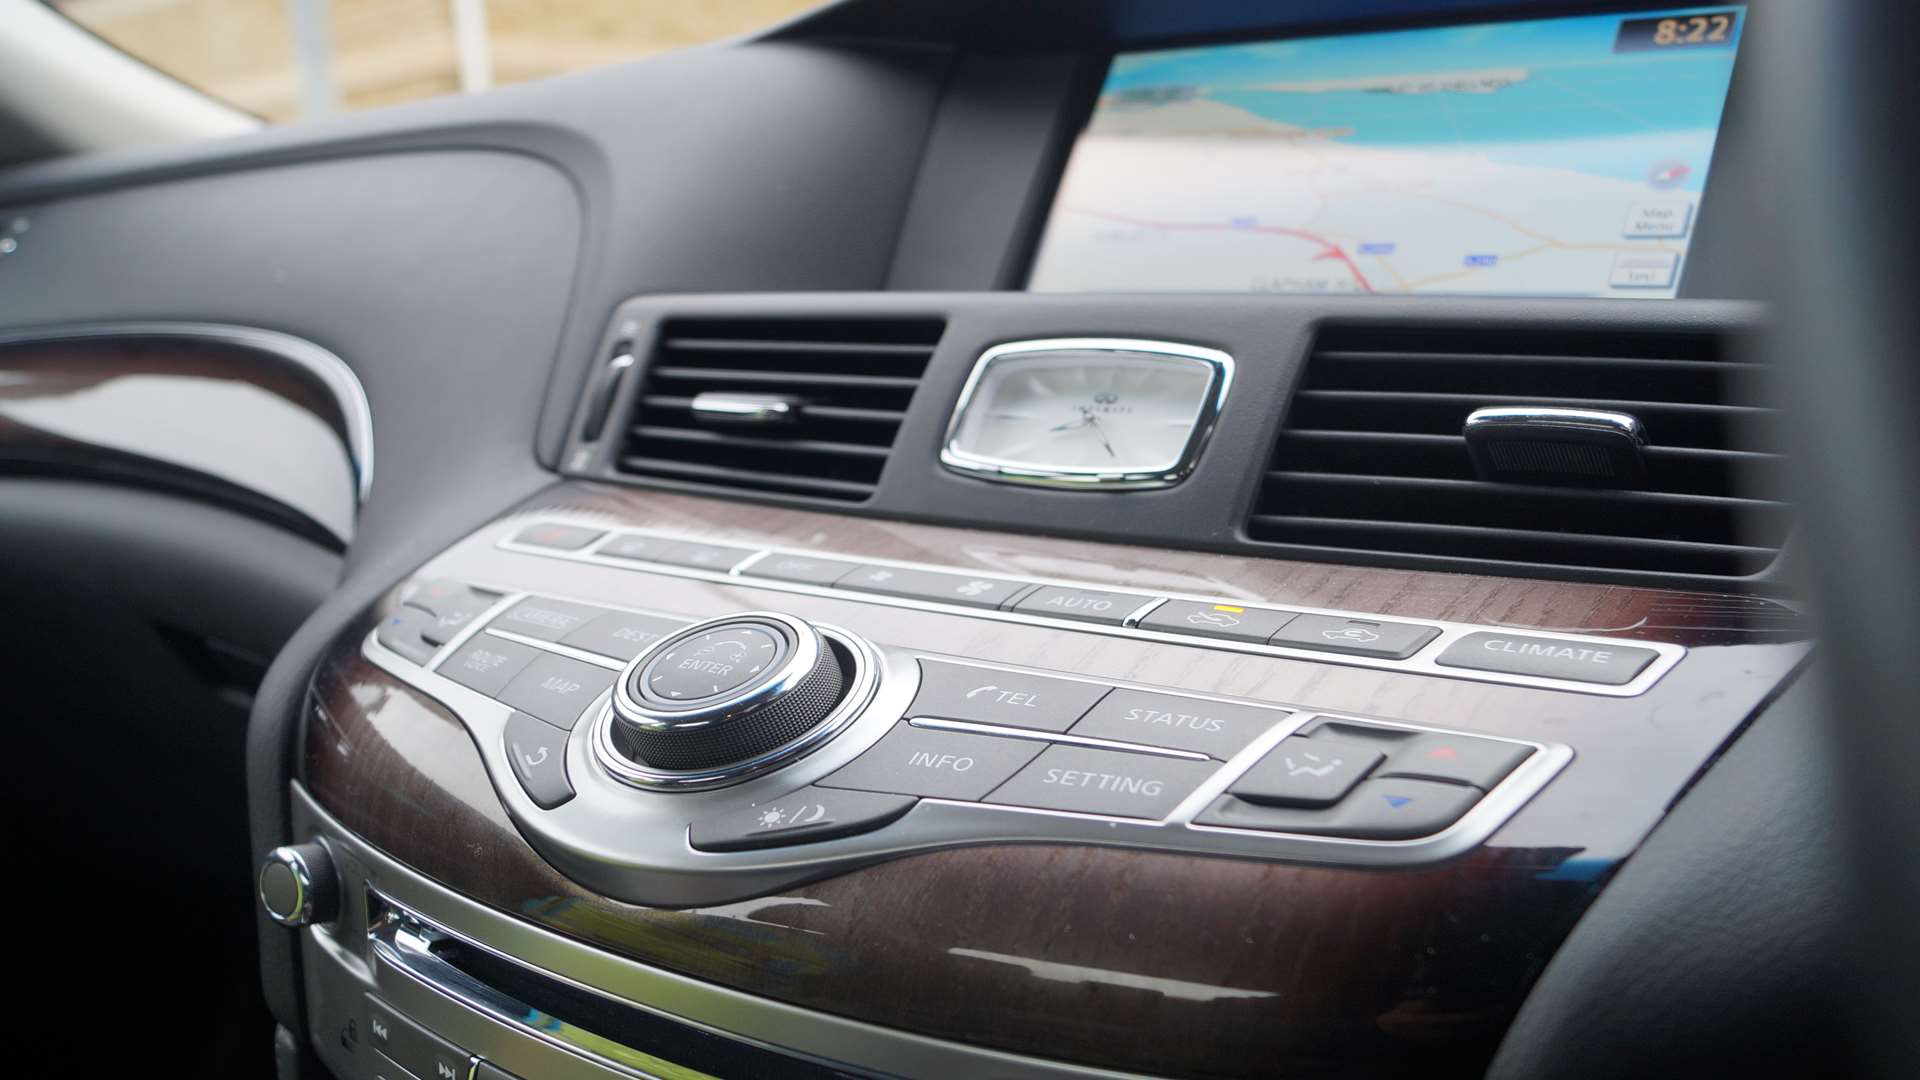 The multimedia screen sits atop the centre console